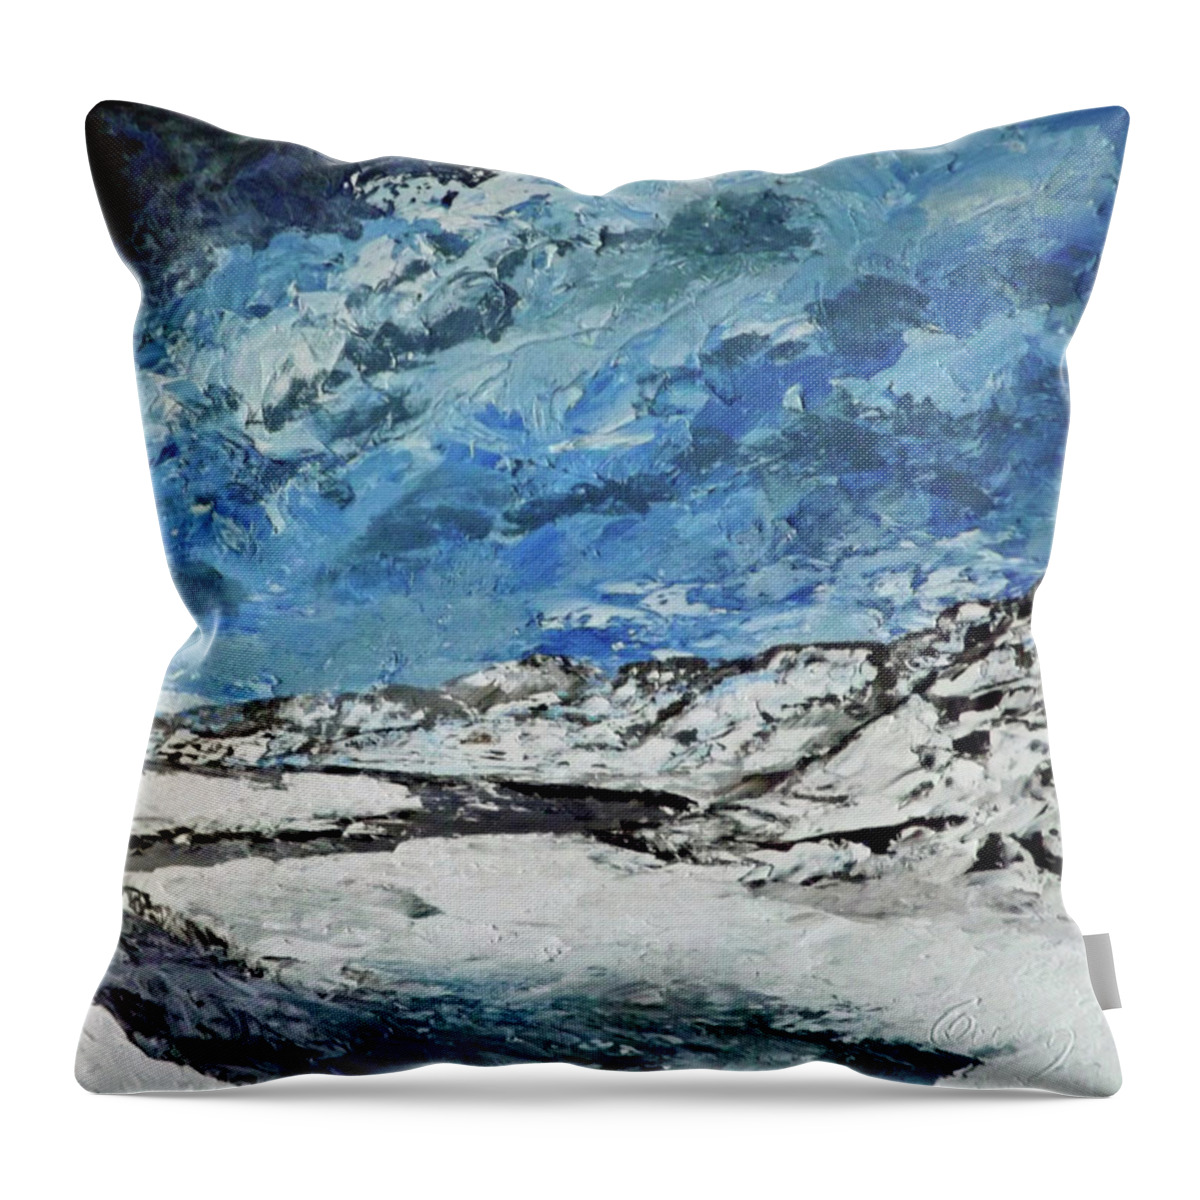 Landscape Throw Pillow featuring the painting Winter Filled Arroyo by Carl Owen